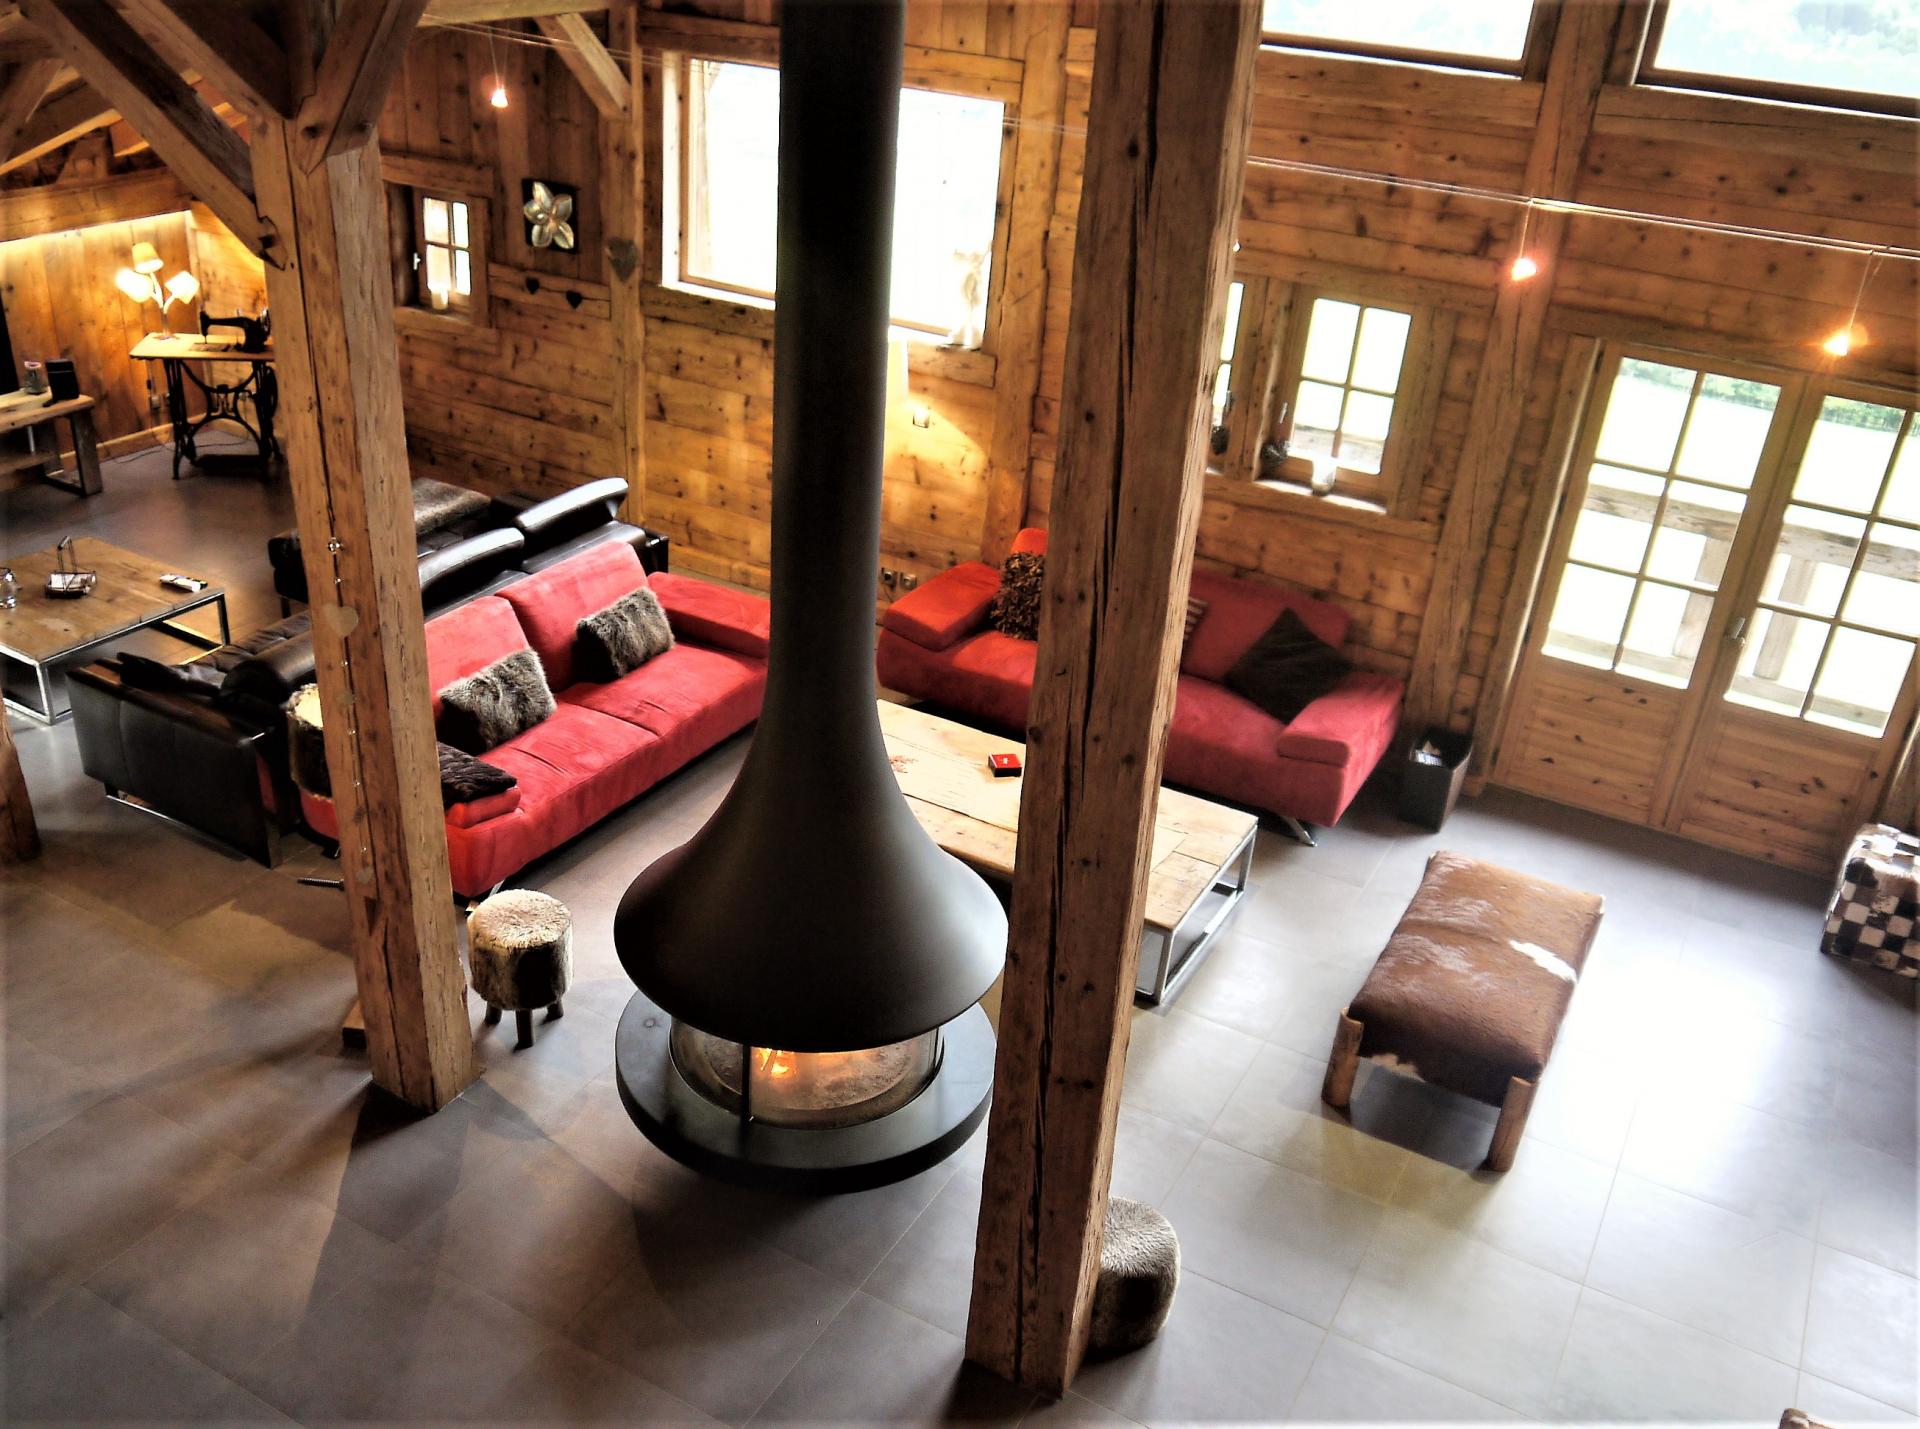 AN OPENED LARGE LIVING ROOM WITH ITS FIREPLACE IN CHALET DE LA FERME IN THE ALPS